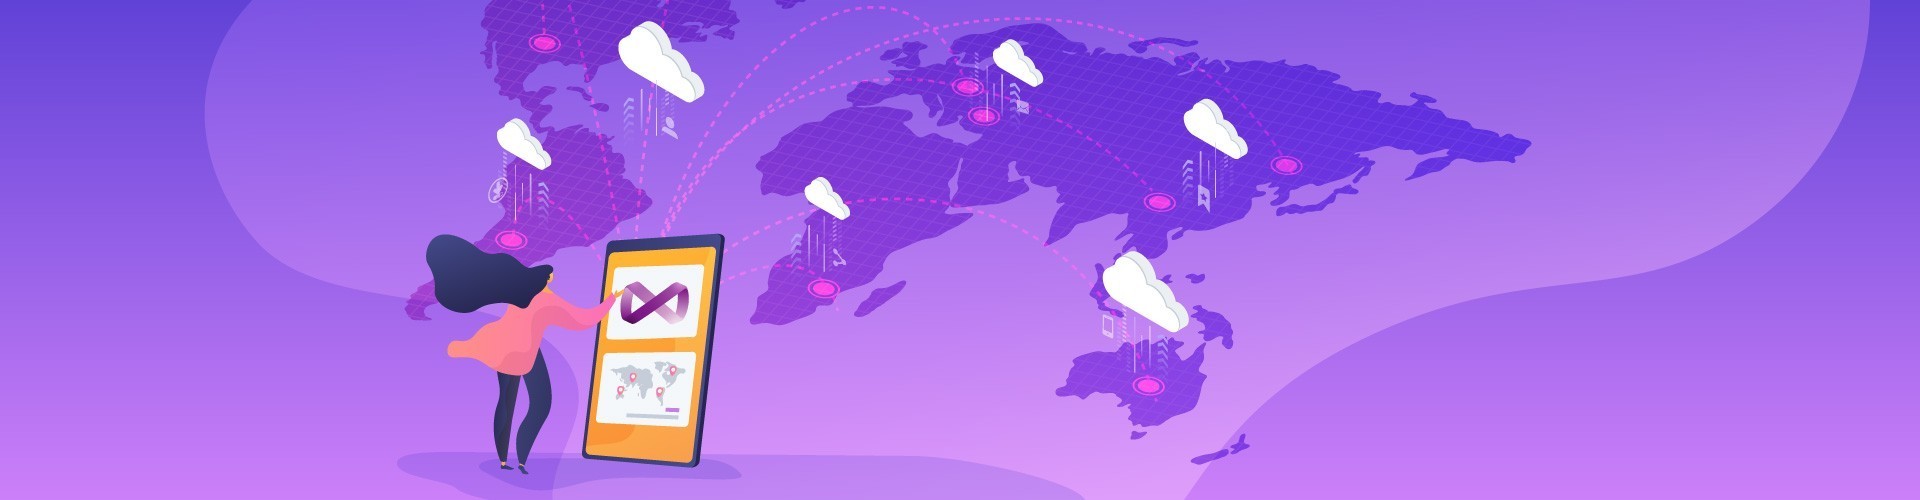 Colocation + Interconnection = Global Domination